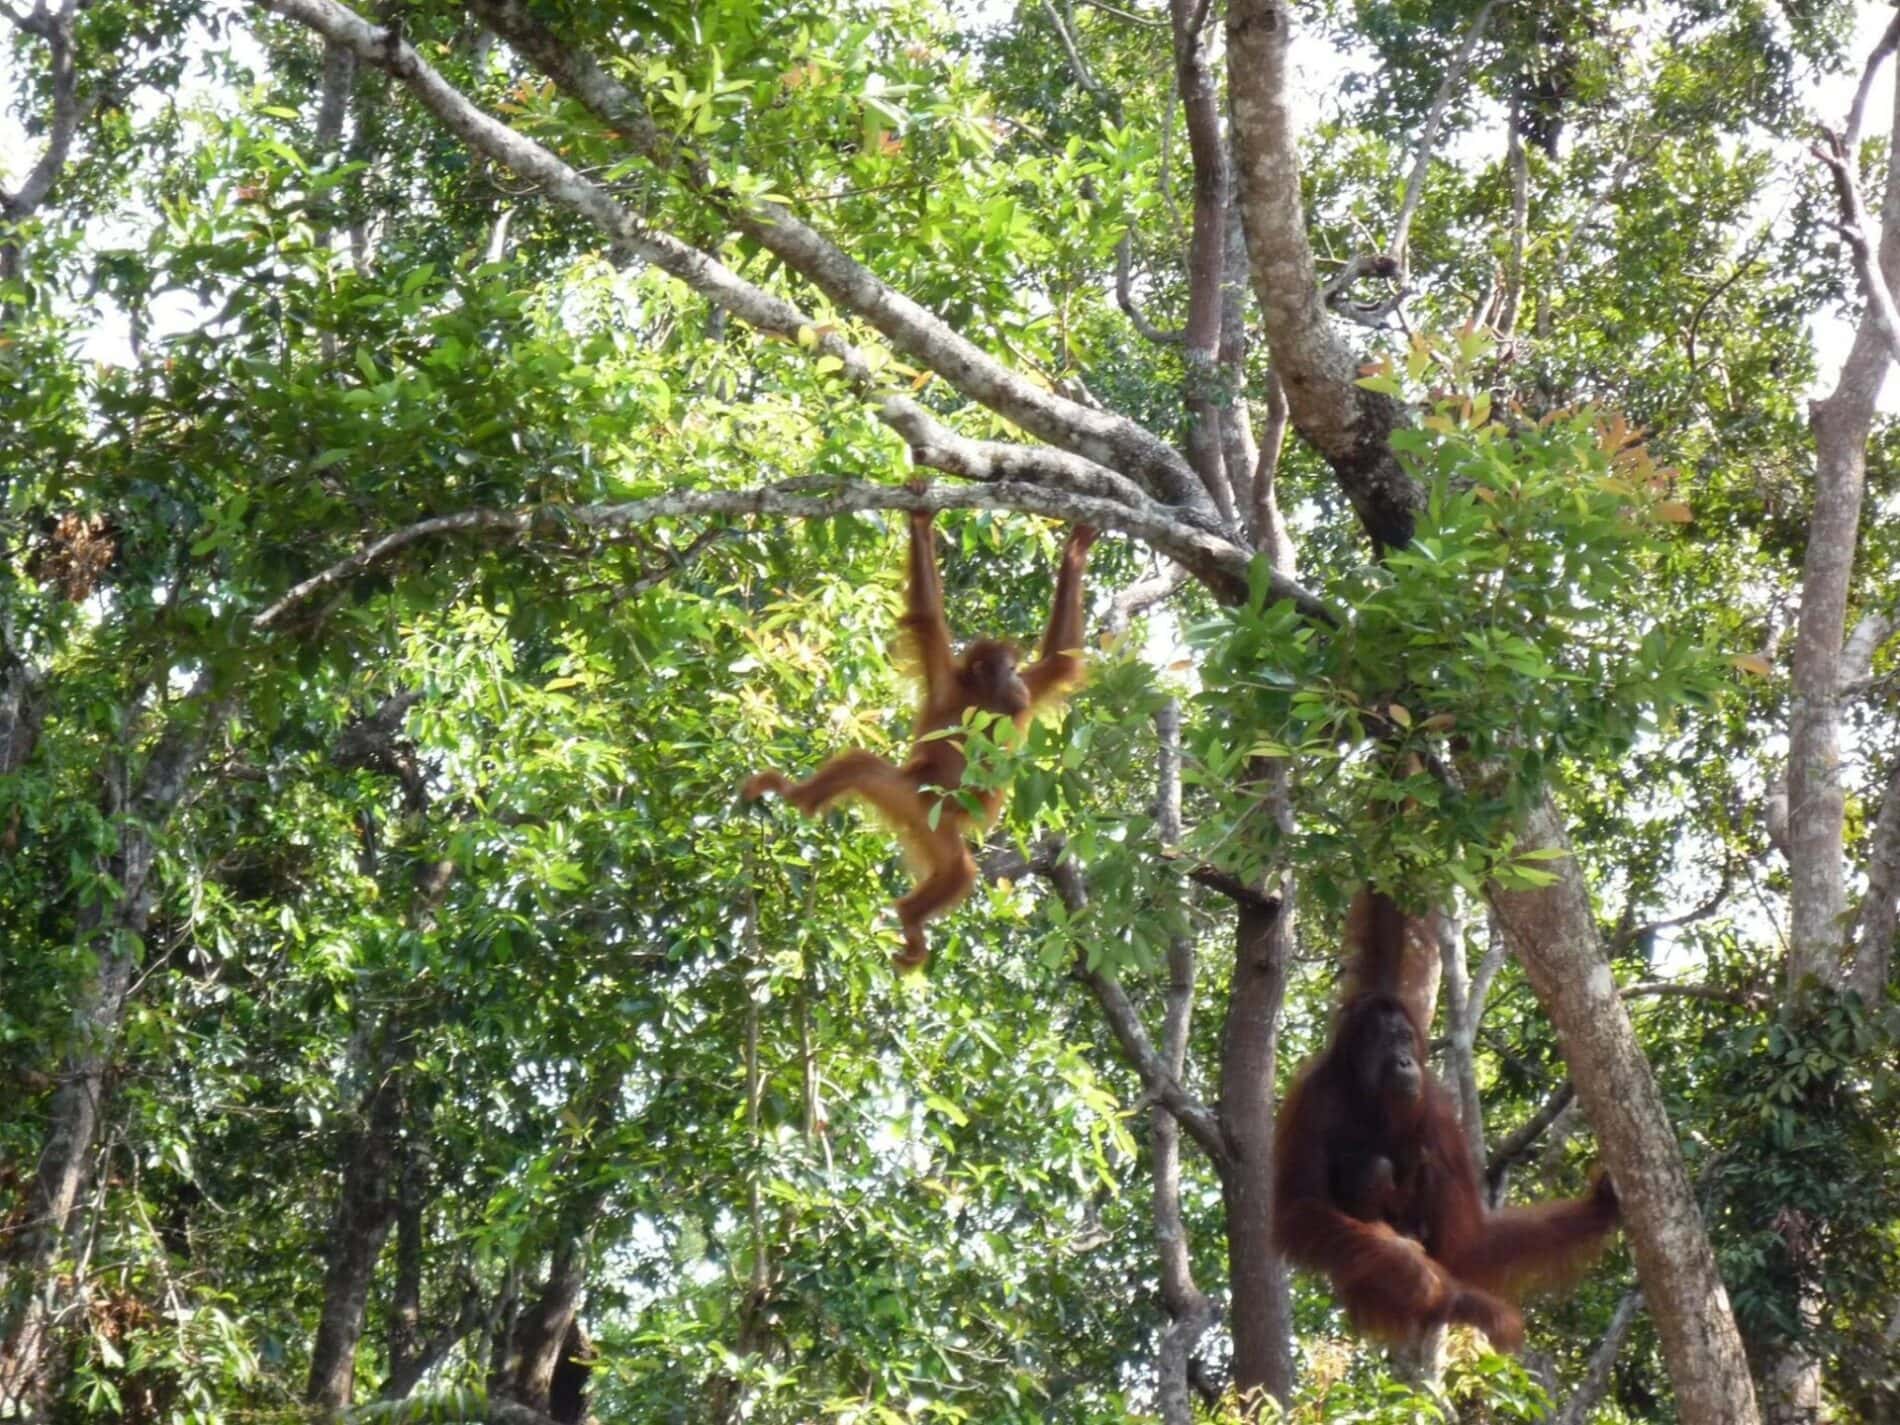 Orangutan habitat at risk corporate concessions need to protect forests